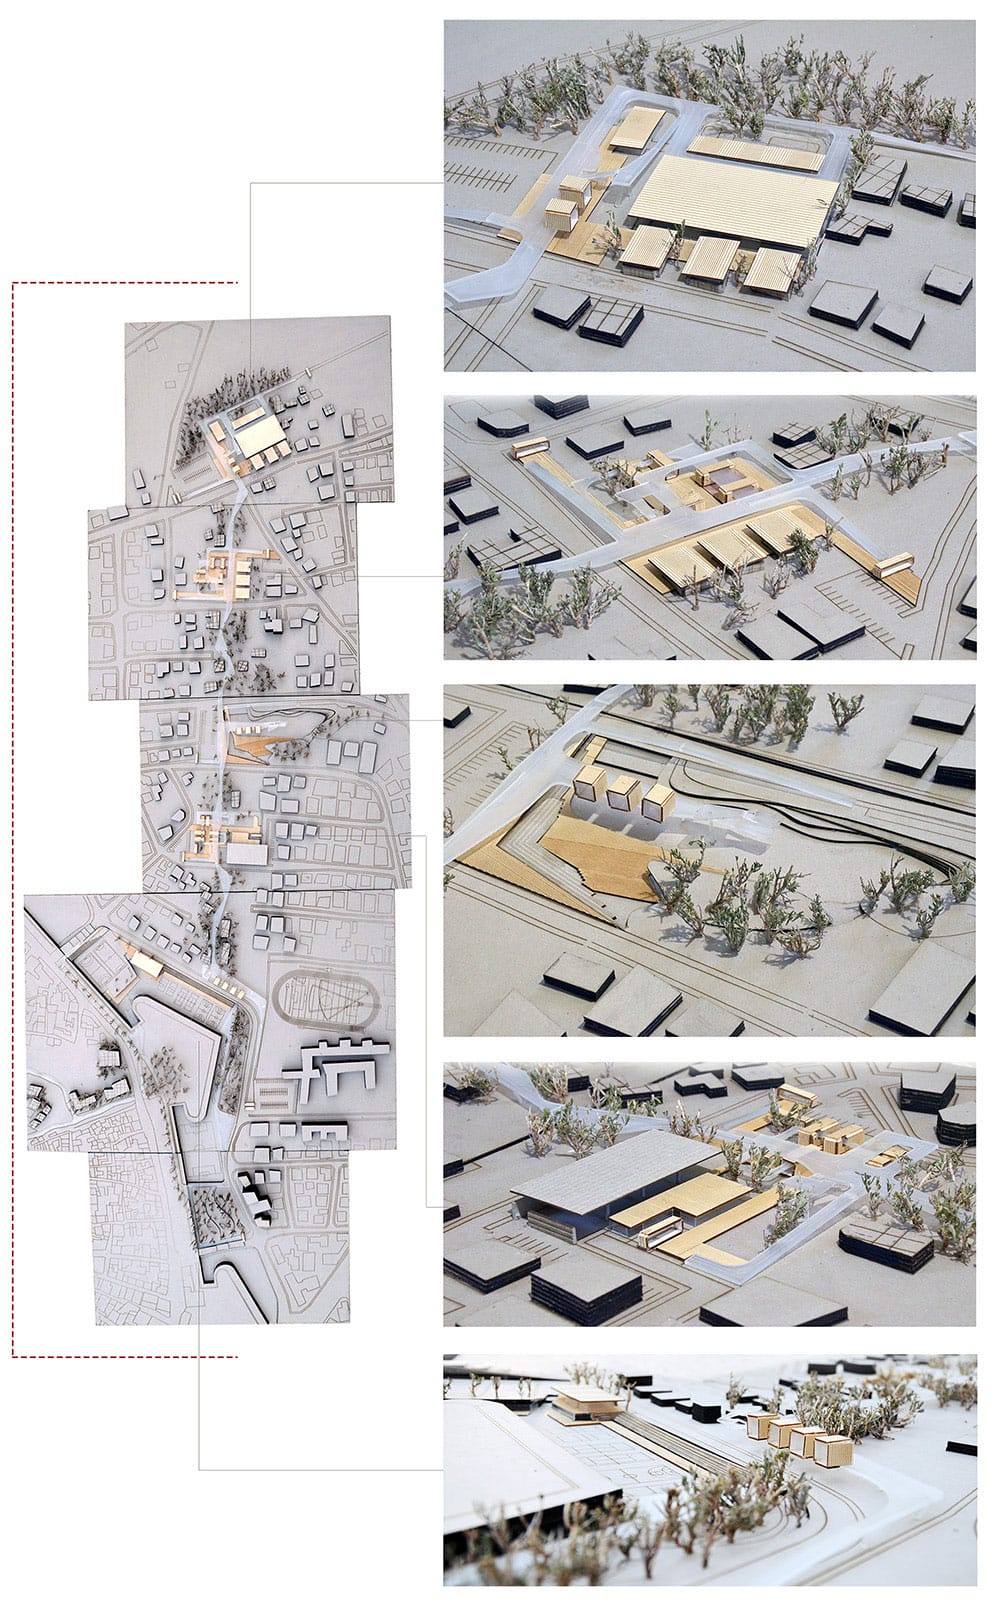 Photographs of the Proposal Model, © Adamos Adamou